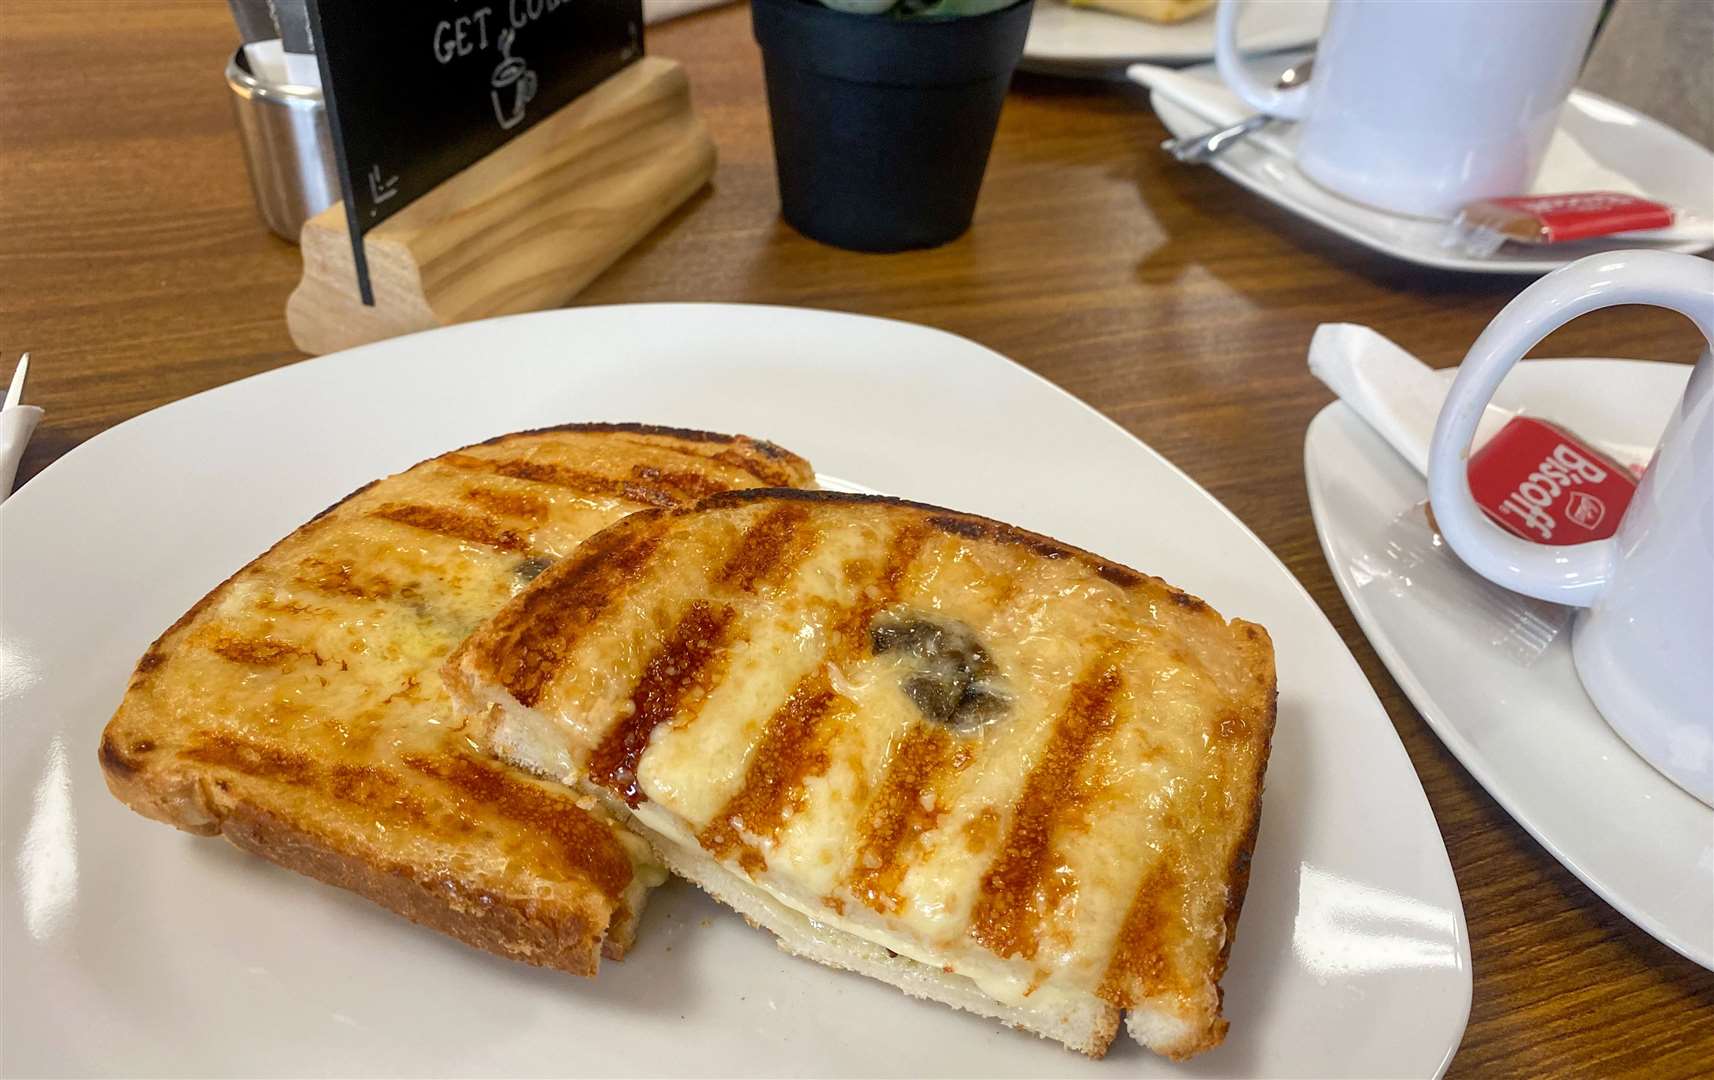 The mushroom toastie was delivered piping hot and was incredibly cheesy and gooey